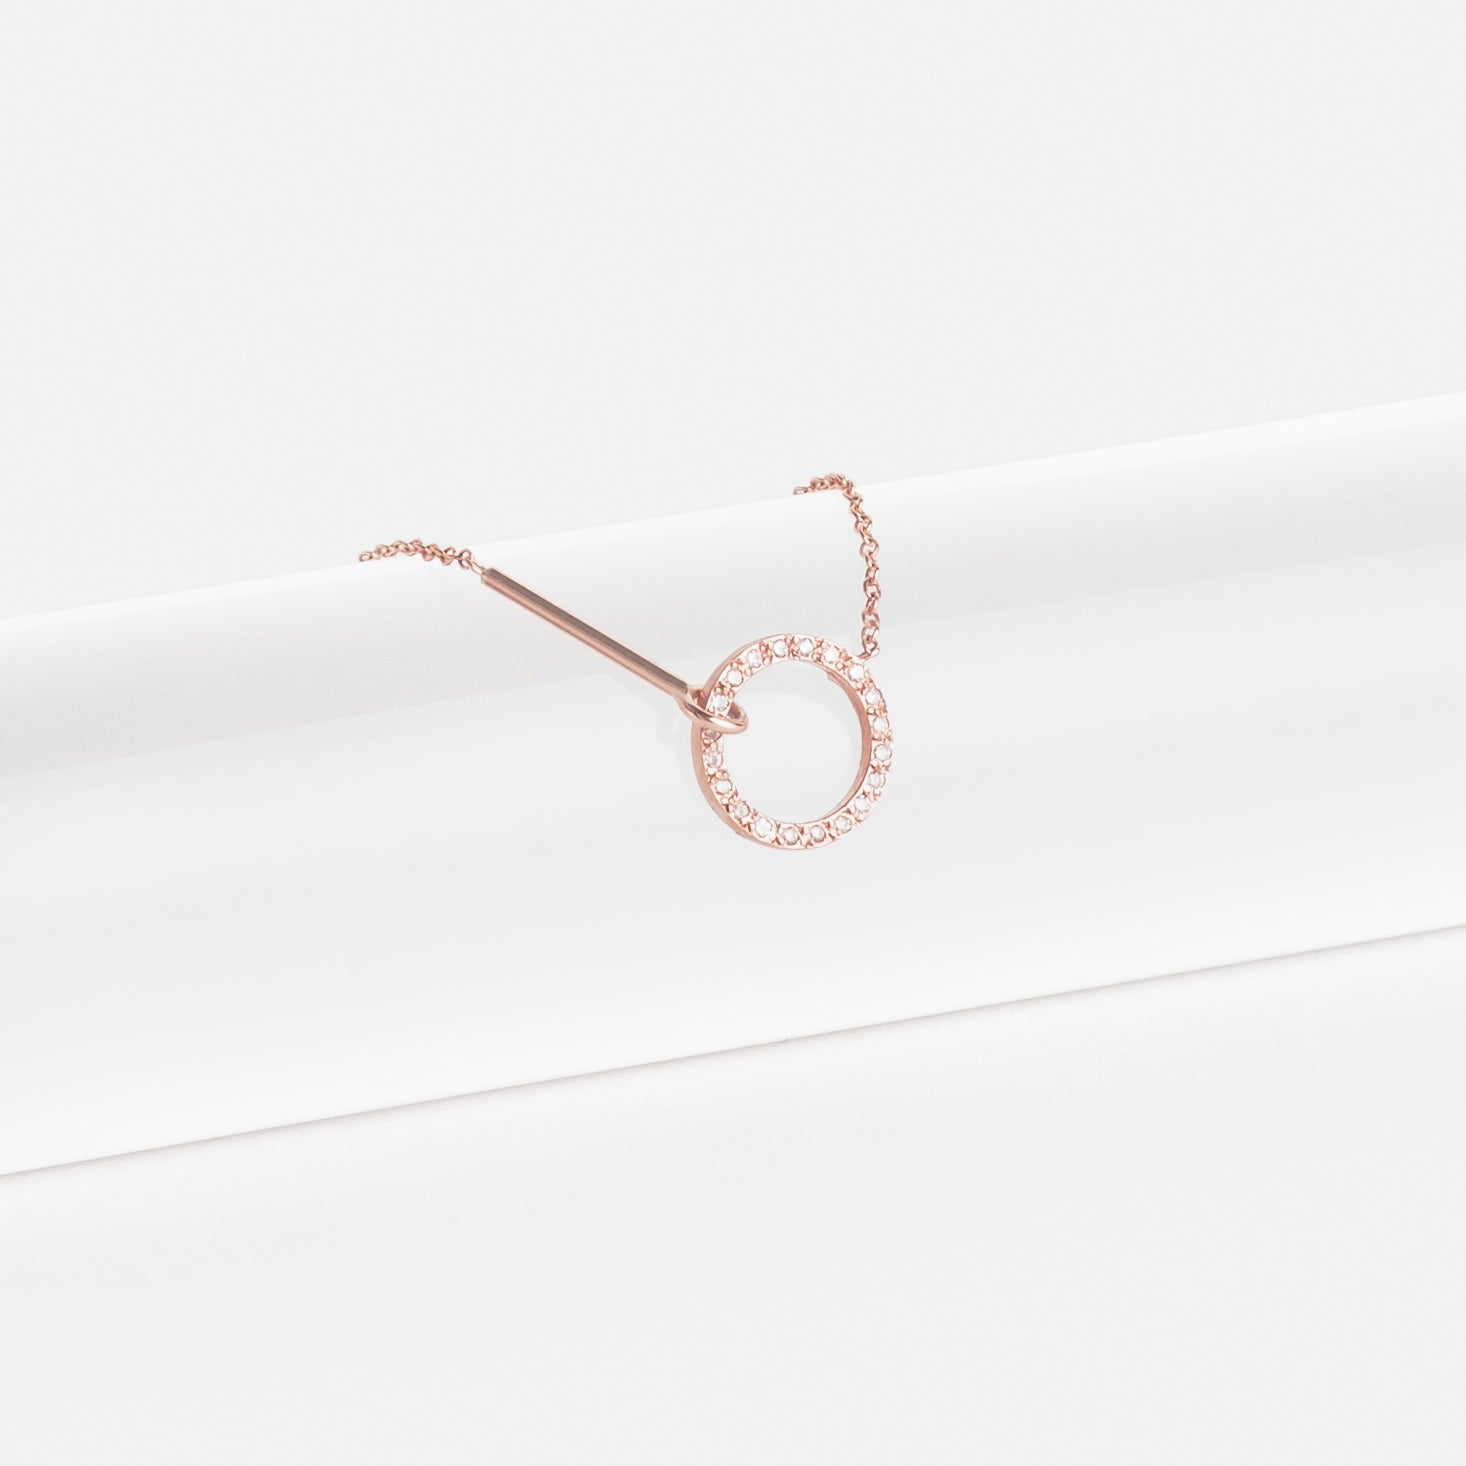 Visata Handmade Necklace in 14k Rose Gold set with White Diamonds By SHW Fine Jewelry NYC